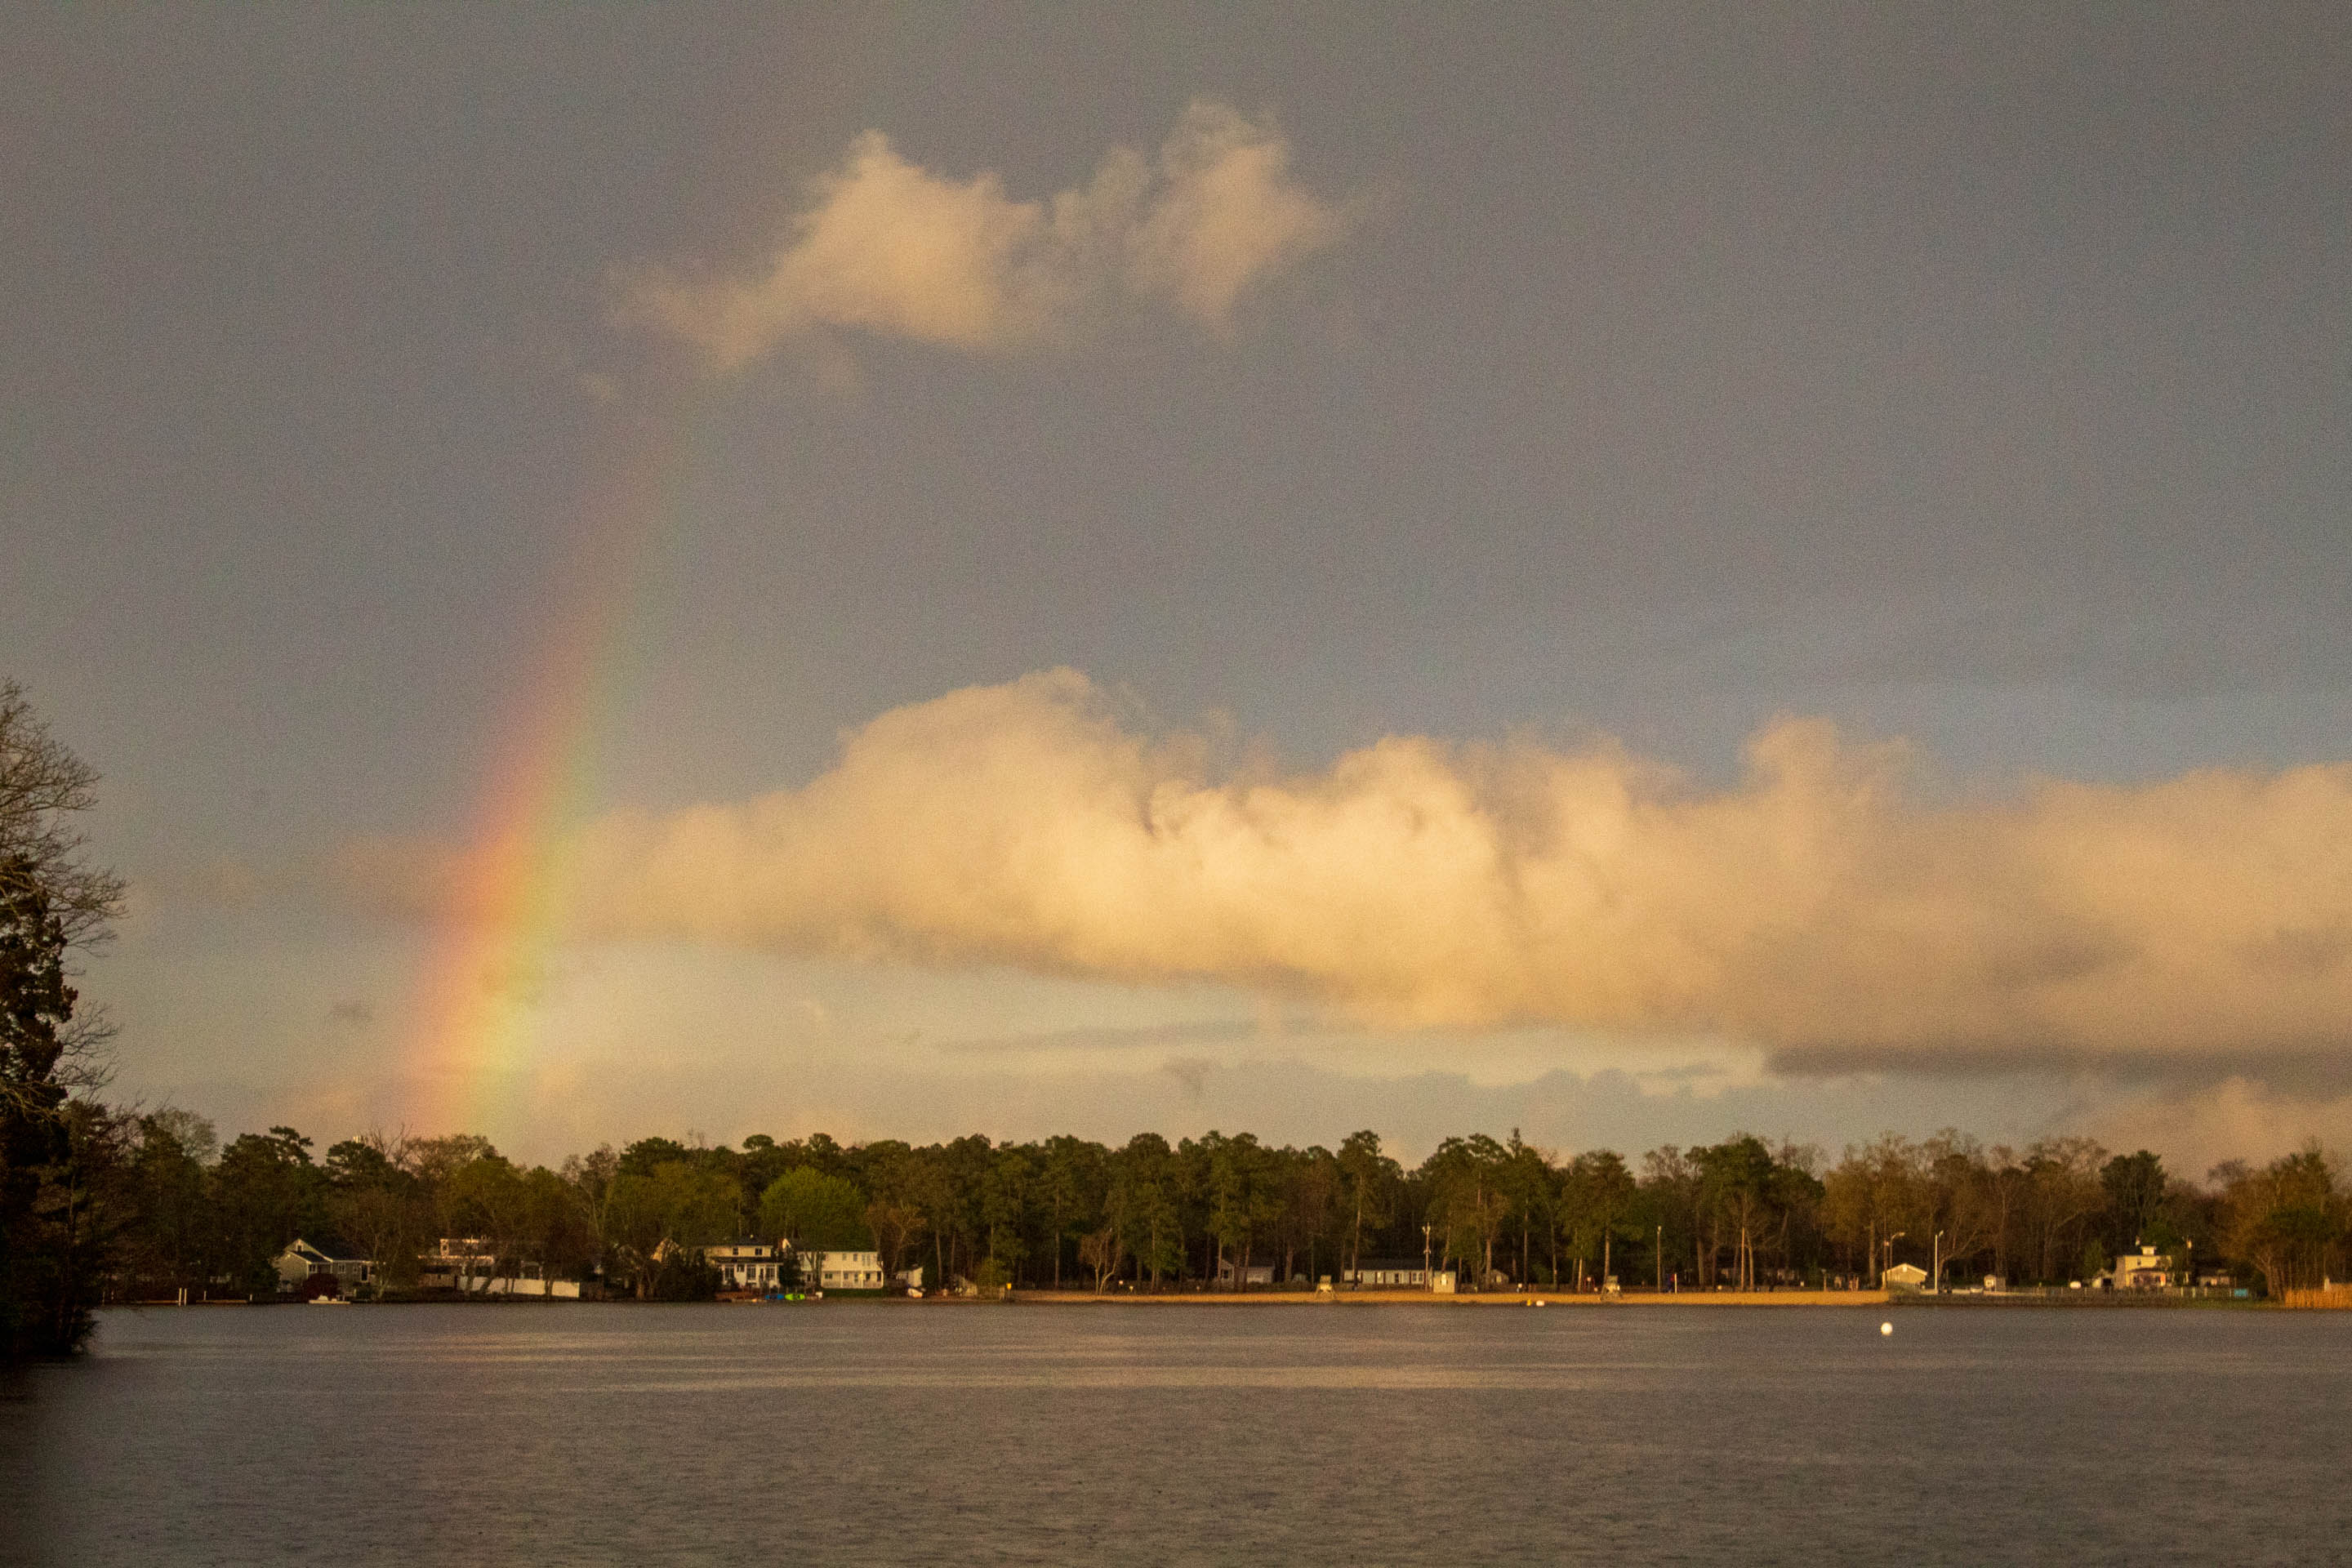 Photograph of a rainbow over a lake in Mays Landing, New Jersey